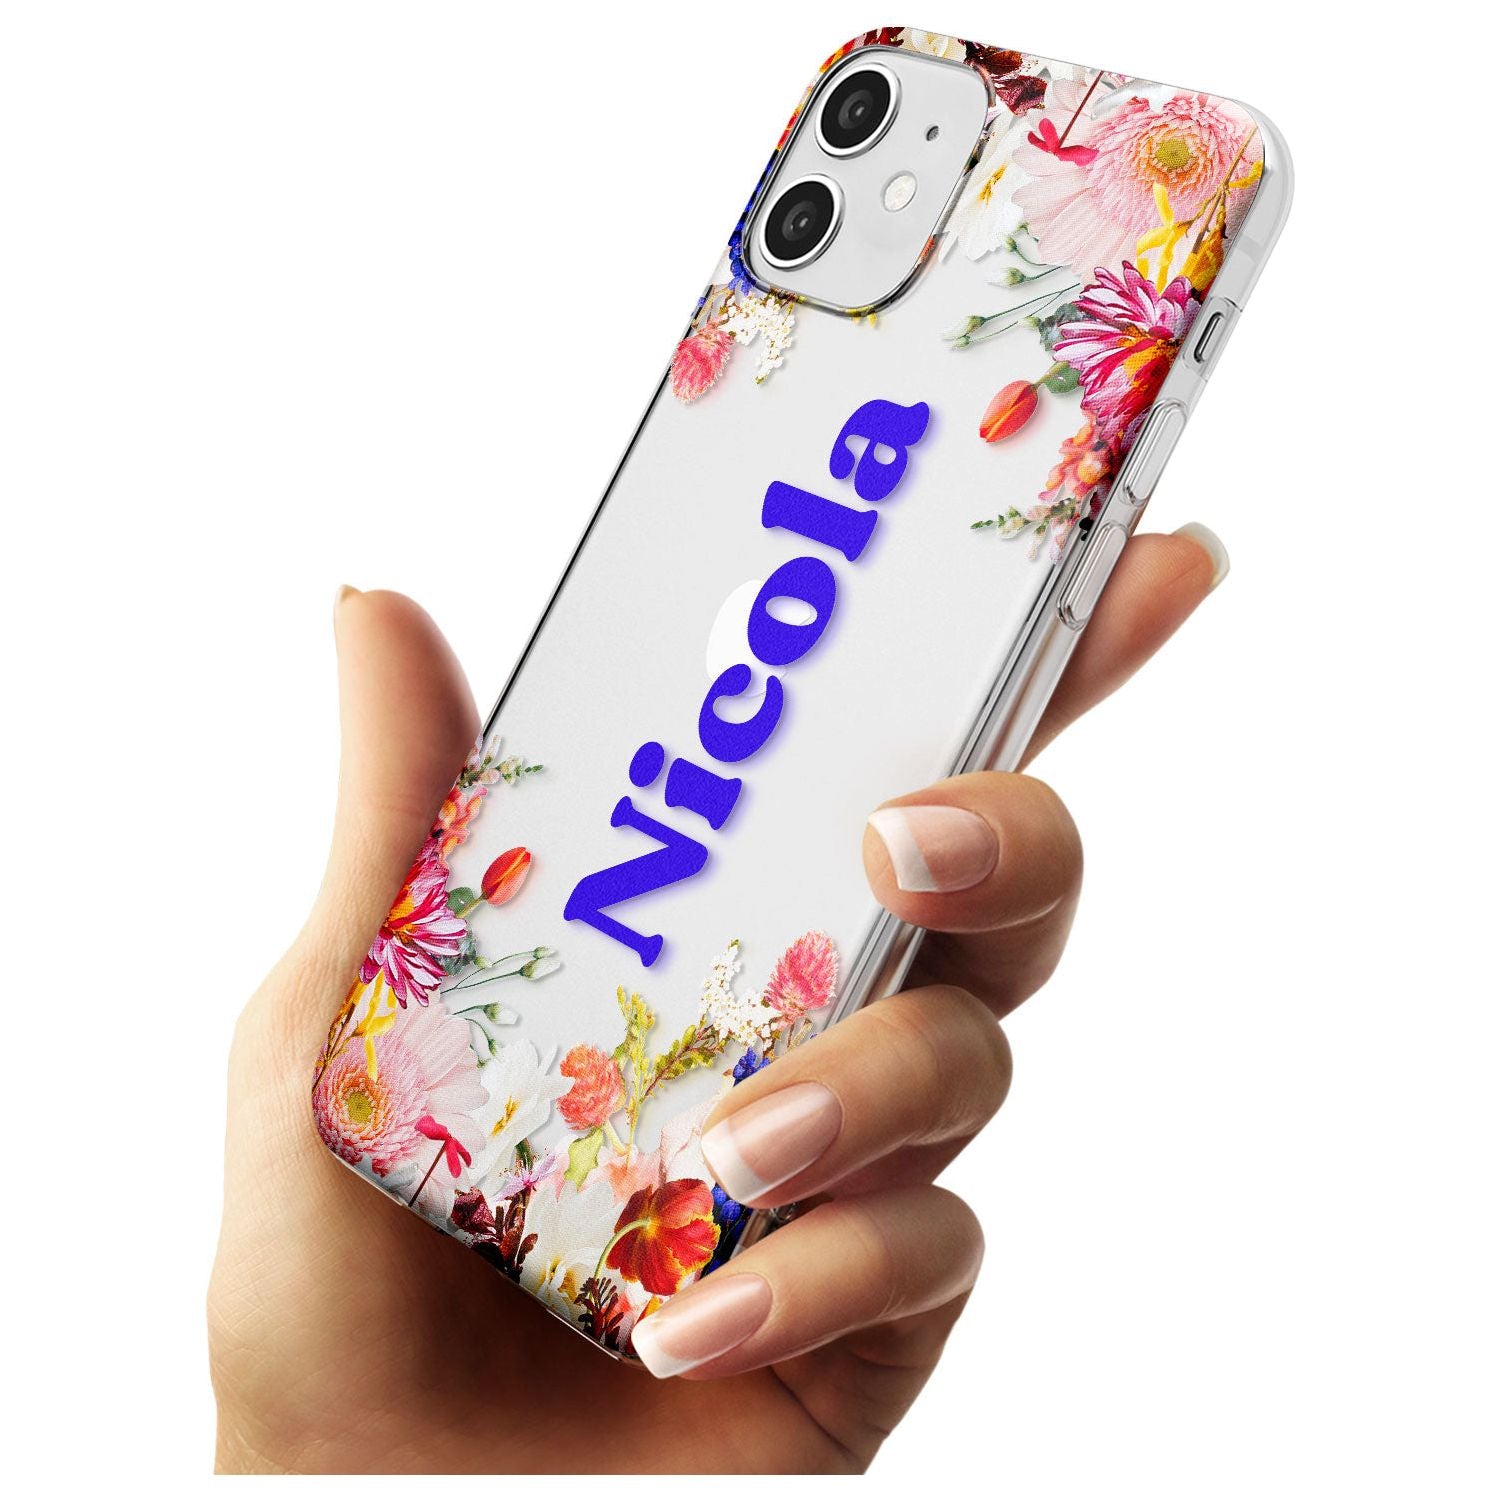 Custom Text with Floral Borders Black Impact Phone Case for iPhone 11